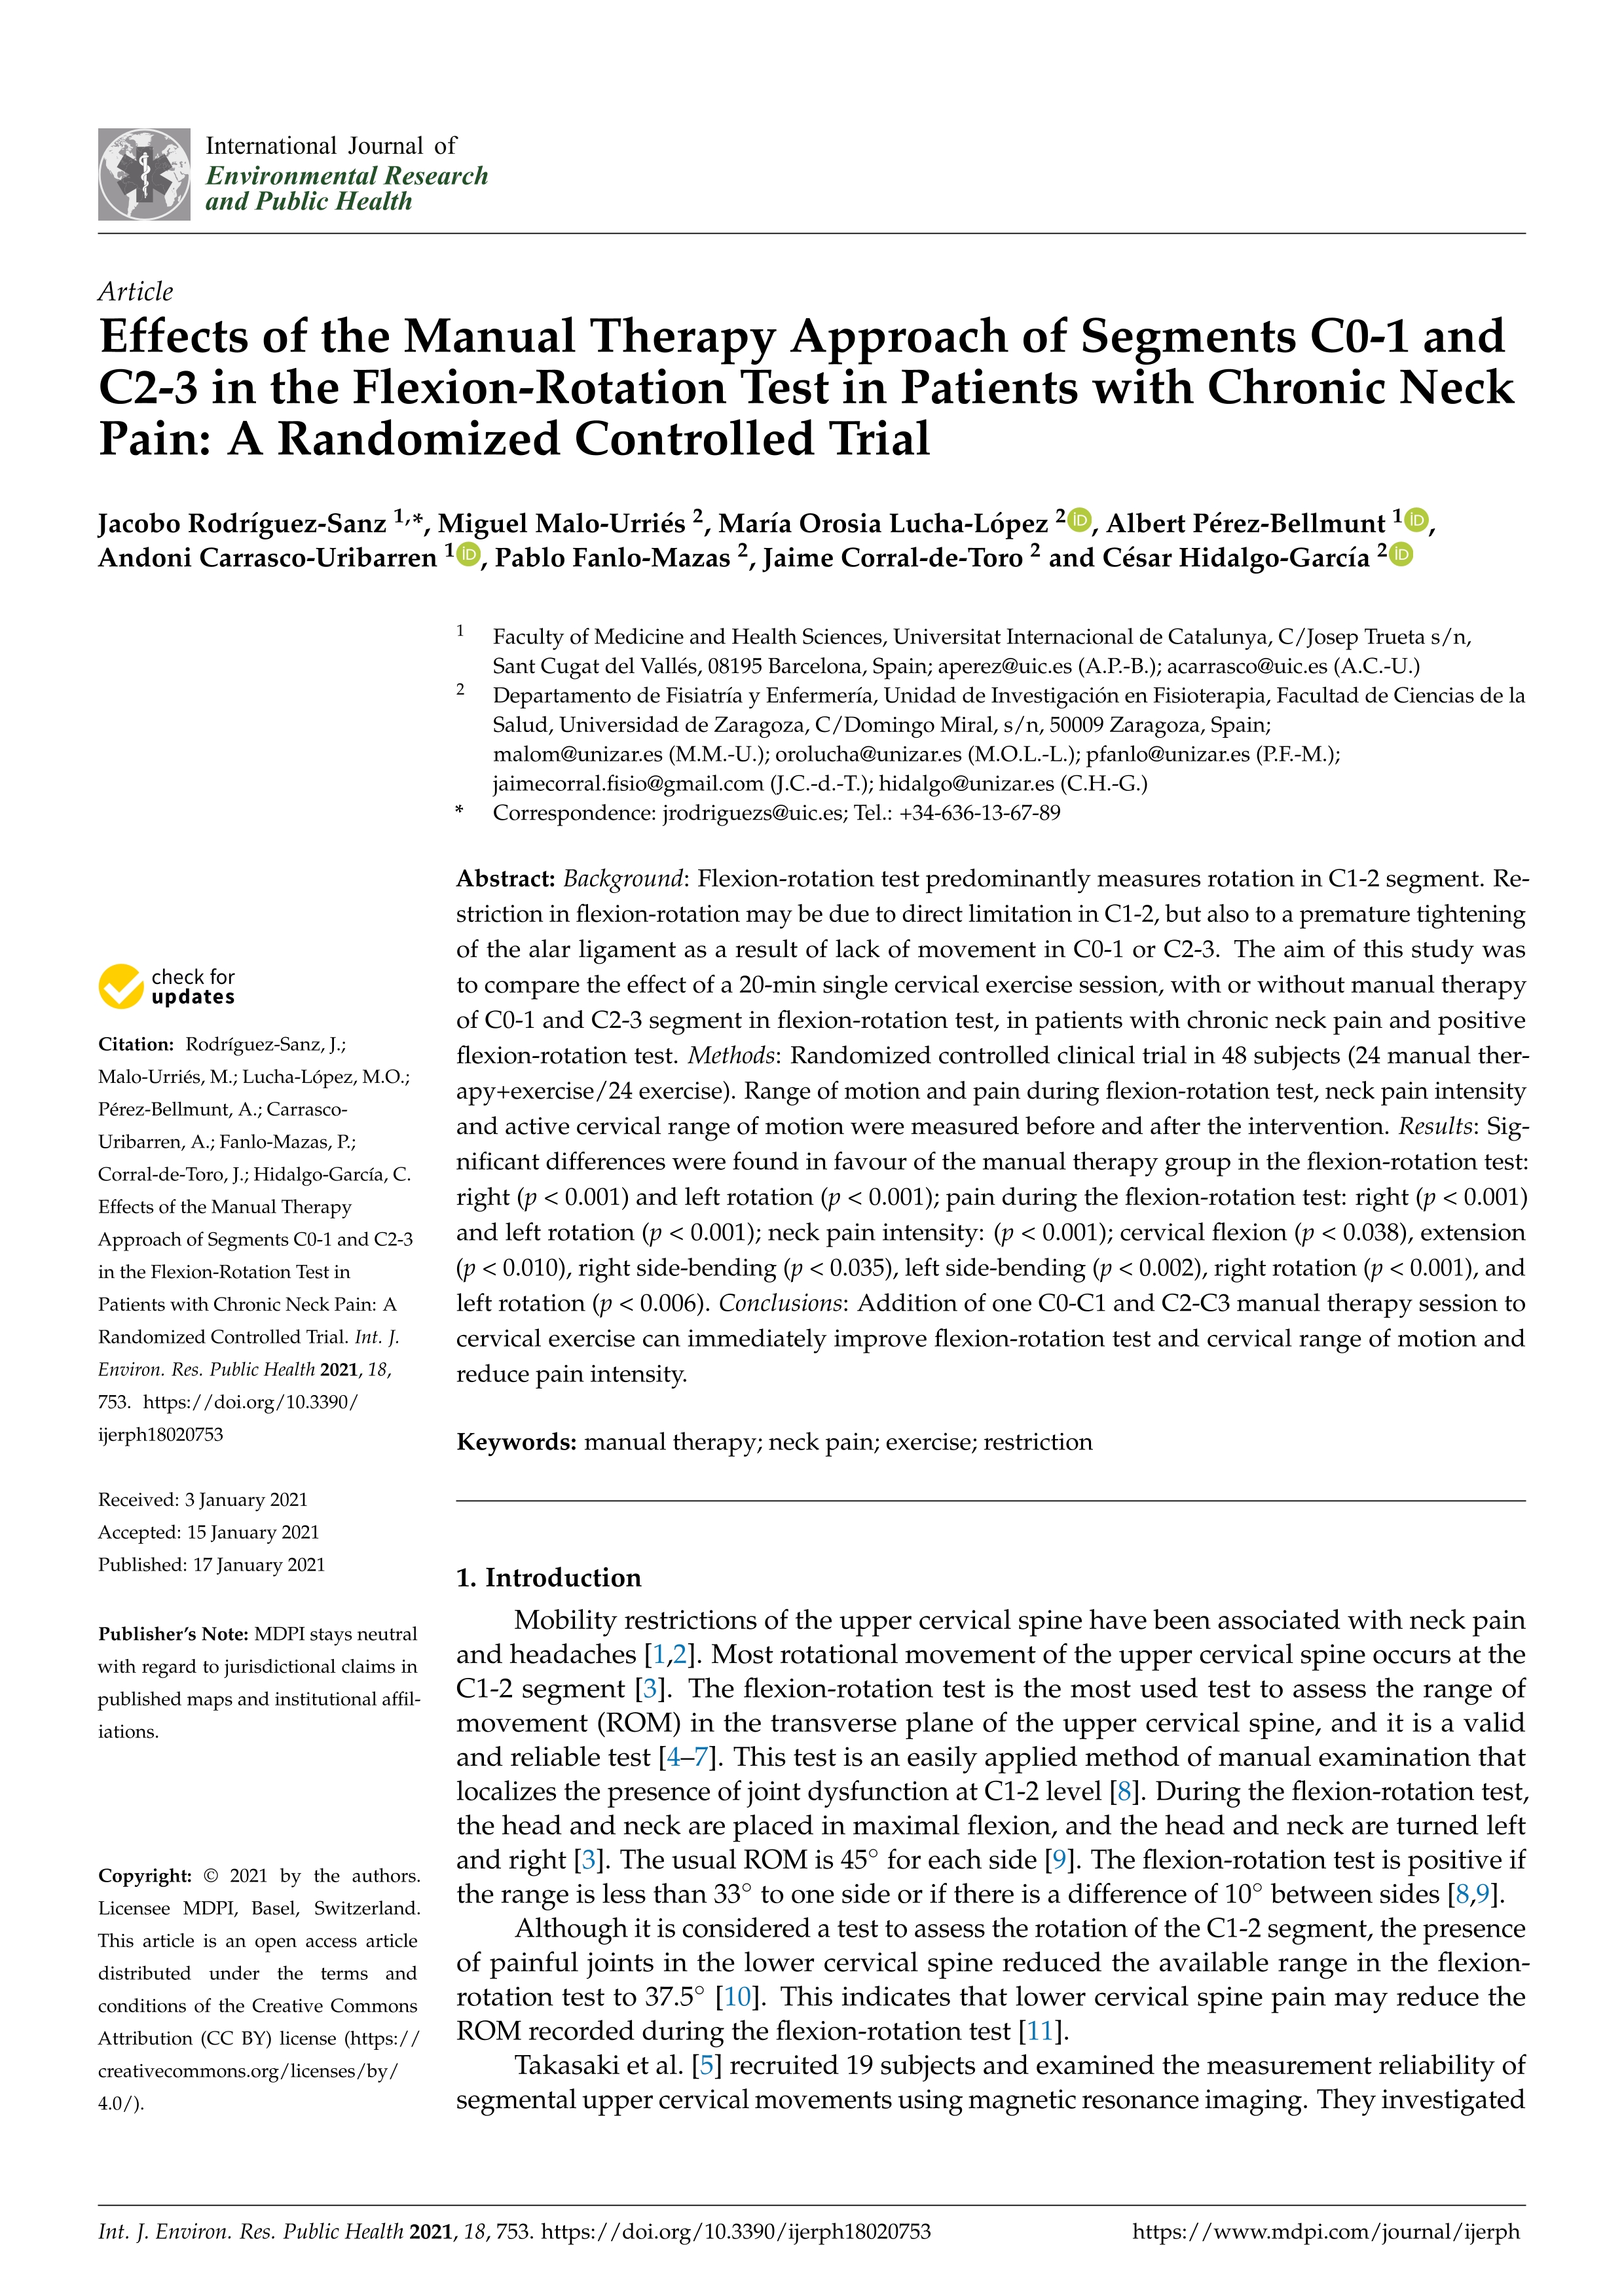 Effects of the manual therapy approach of segments C0-1 and C2-3 in the flexion-rotation test in patients with chronic neck pain: A randomized controlled trial